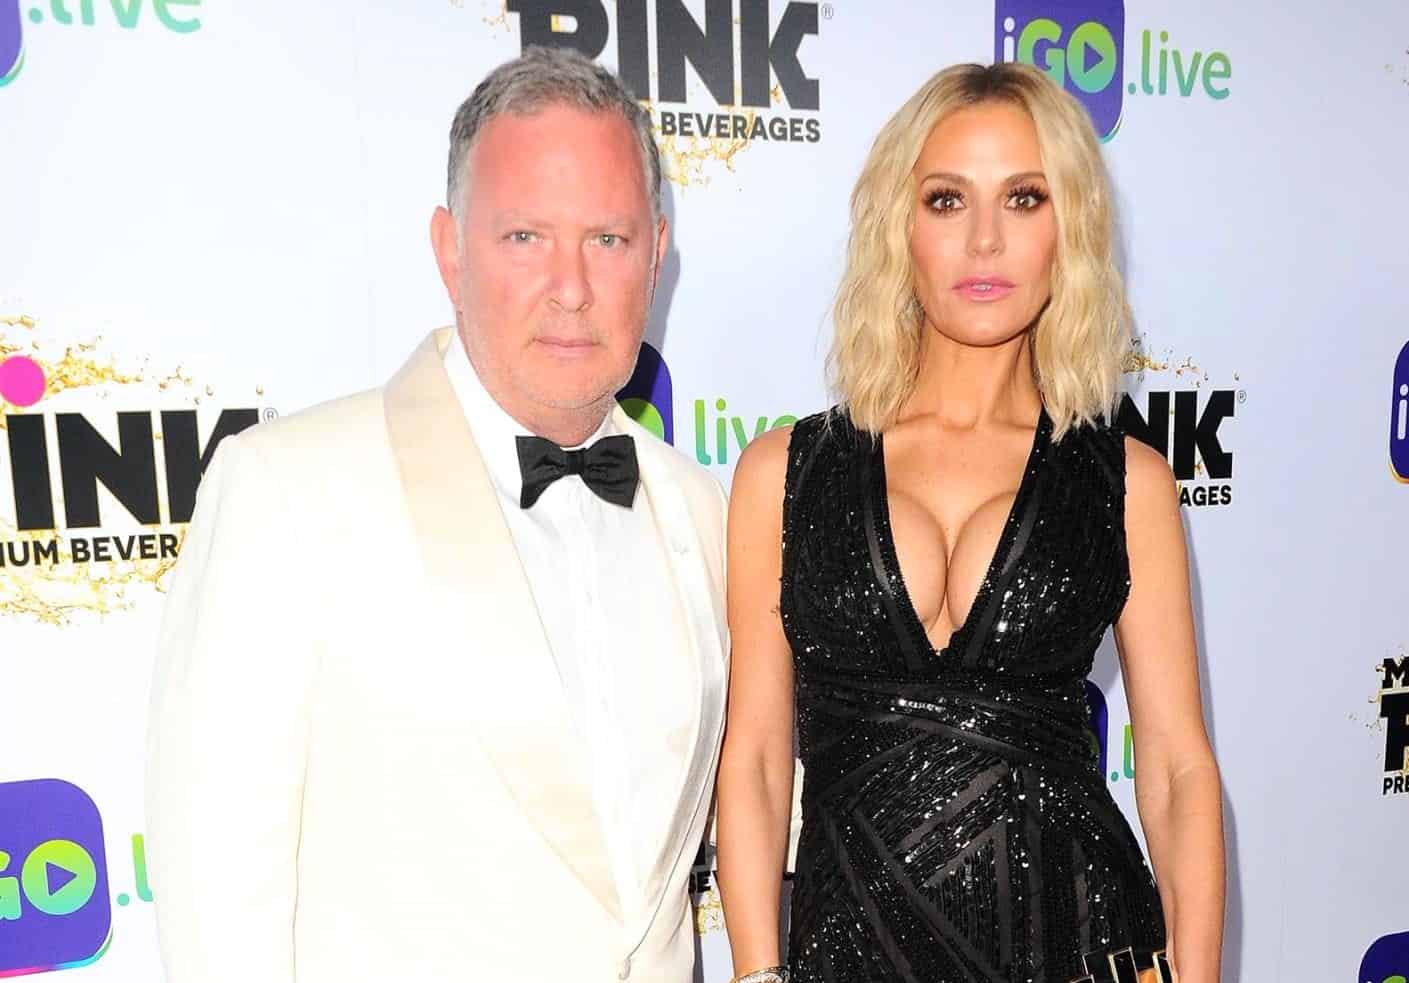 Dorit Kemsley and Husband PK Break Silence on Armed Robbery, Confirm They're "Doing Ok" as PK Returns From London and Andy Cohen and the RHOBH Cast Reacts